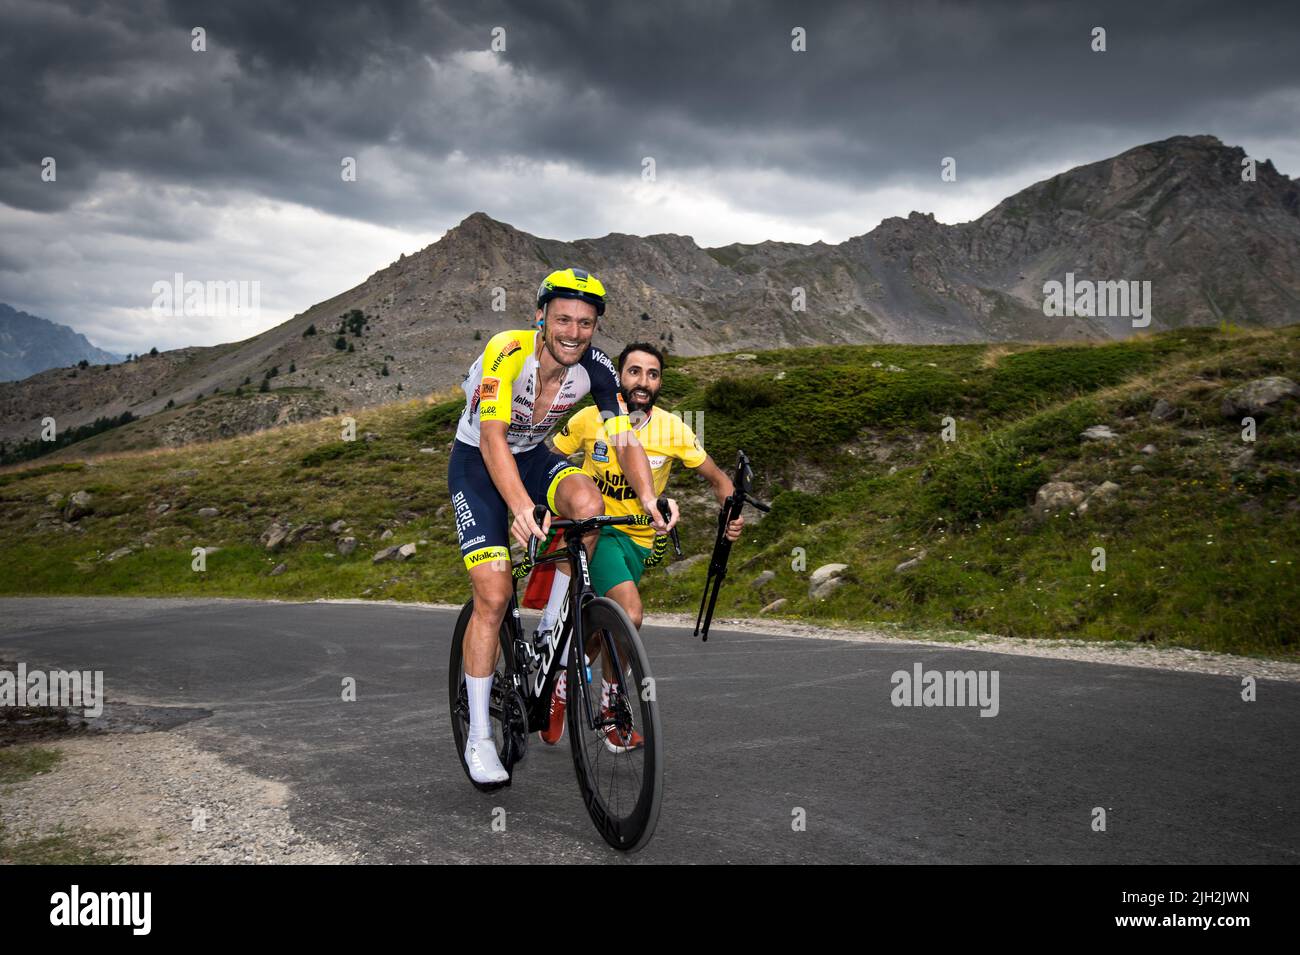 French Adrien Petit (Intermarché-Wanty-Gobert Matériaux) in action in the last kilometers of the climb of the Col du Granon during the 11th stage of the Cycling Tour de France 2022. The 11th stage of the Tour de France 2022 between Albertville and the top of the Col du Granon with a distance of 151.7 km. The winner of the stage is the Danish Jonas Vingegaard (Jumbo Visma team) who also takes the first place in the general classification at the detriment of the Slovenian Tadej Pogacar (team UAE Emirates). Colombian Nairo Quintana (Arkea Samsic team) ranked second in the stage ahead of Frenchman Stock Photo